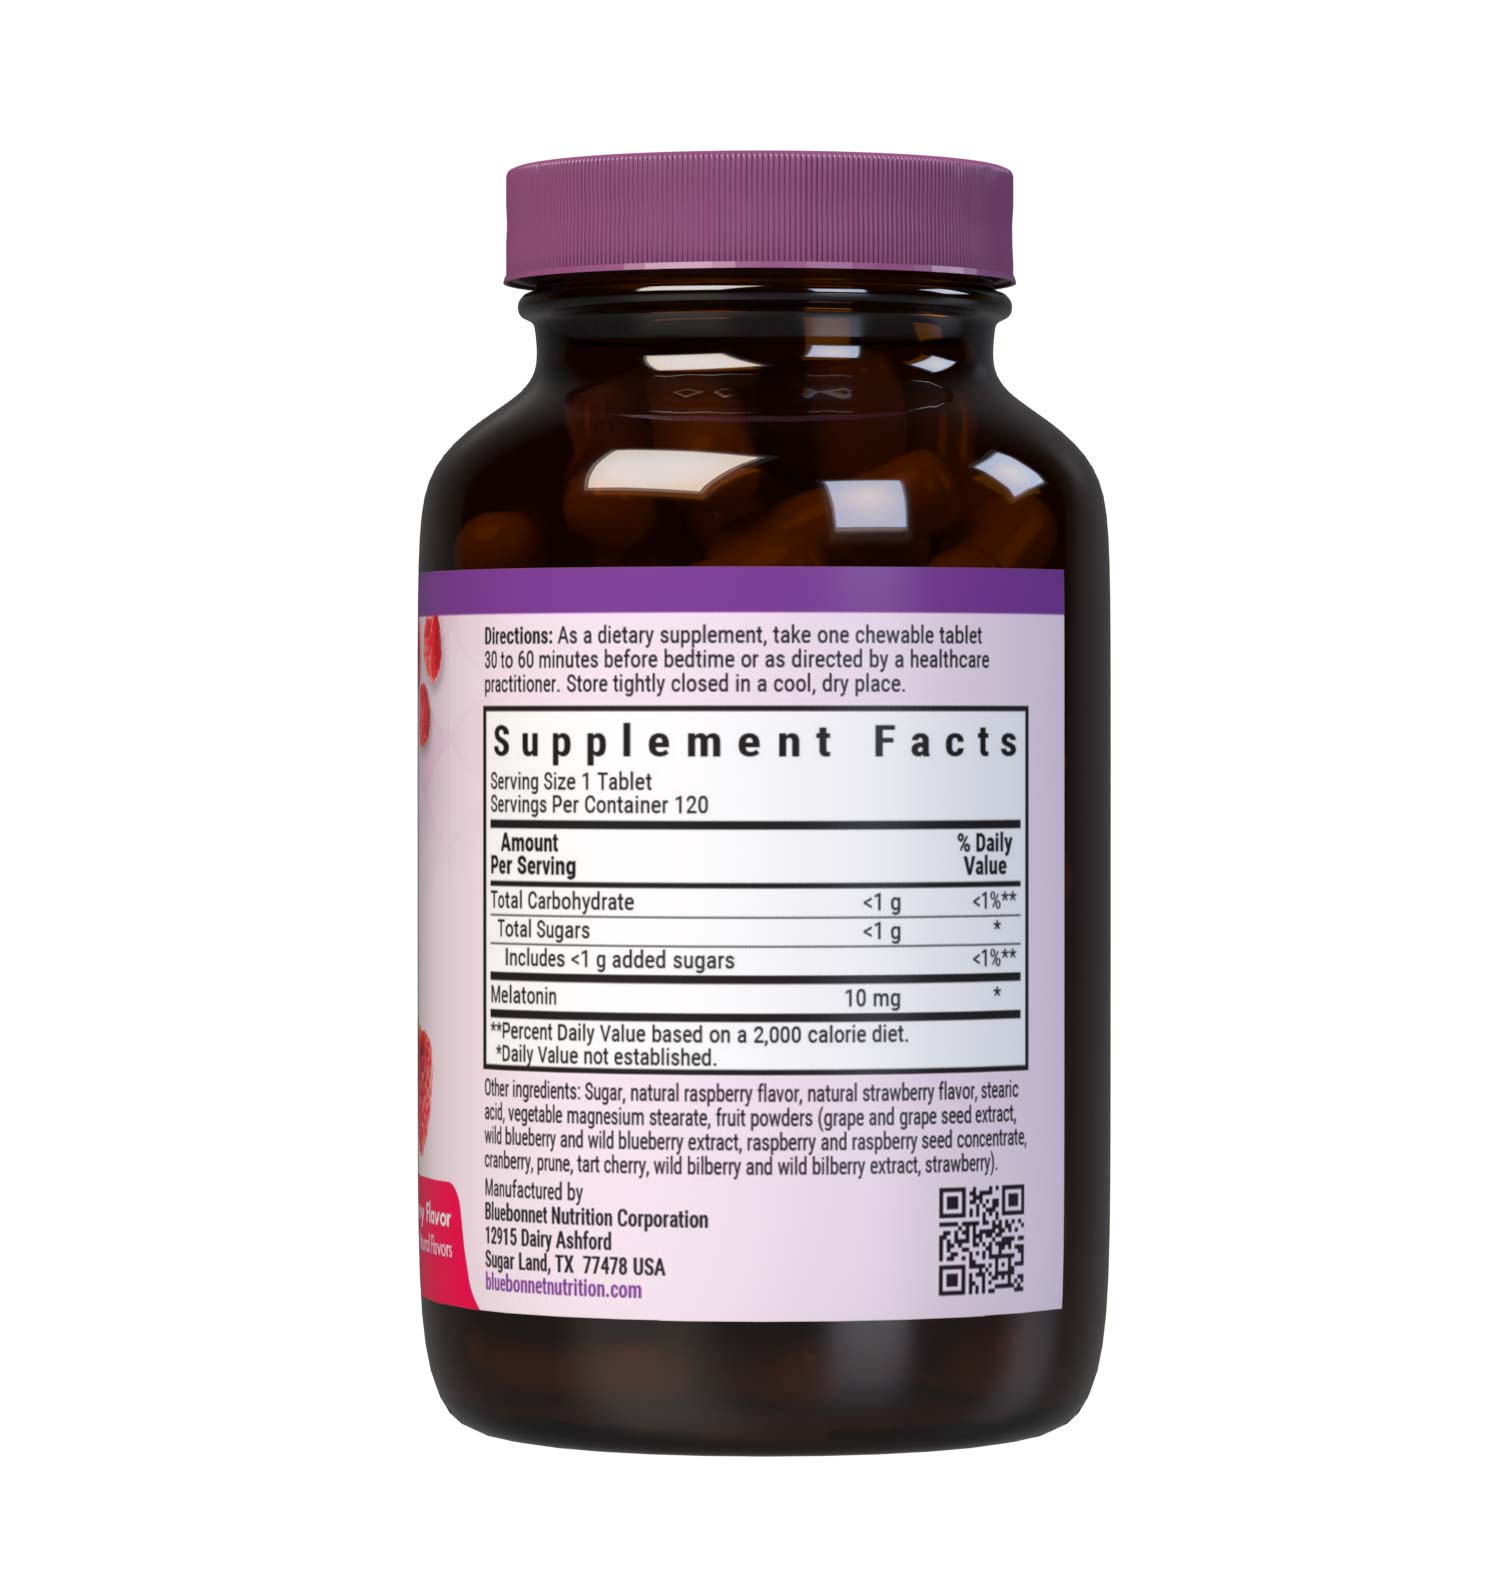 Bluebonnet’s EarthSweet Chewables Melatonin 10 mg 120 Tablets help minimize occasional sleeplessness for those affected by disturbed sleep/wake cycles, such as those traveling across multiple time zones. This product is sweetened with EarthSweet, a proprietary mix of fruit powders and sugar cane crystals. Supplement facts panel. #size_120 count